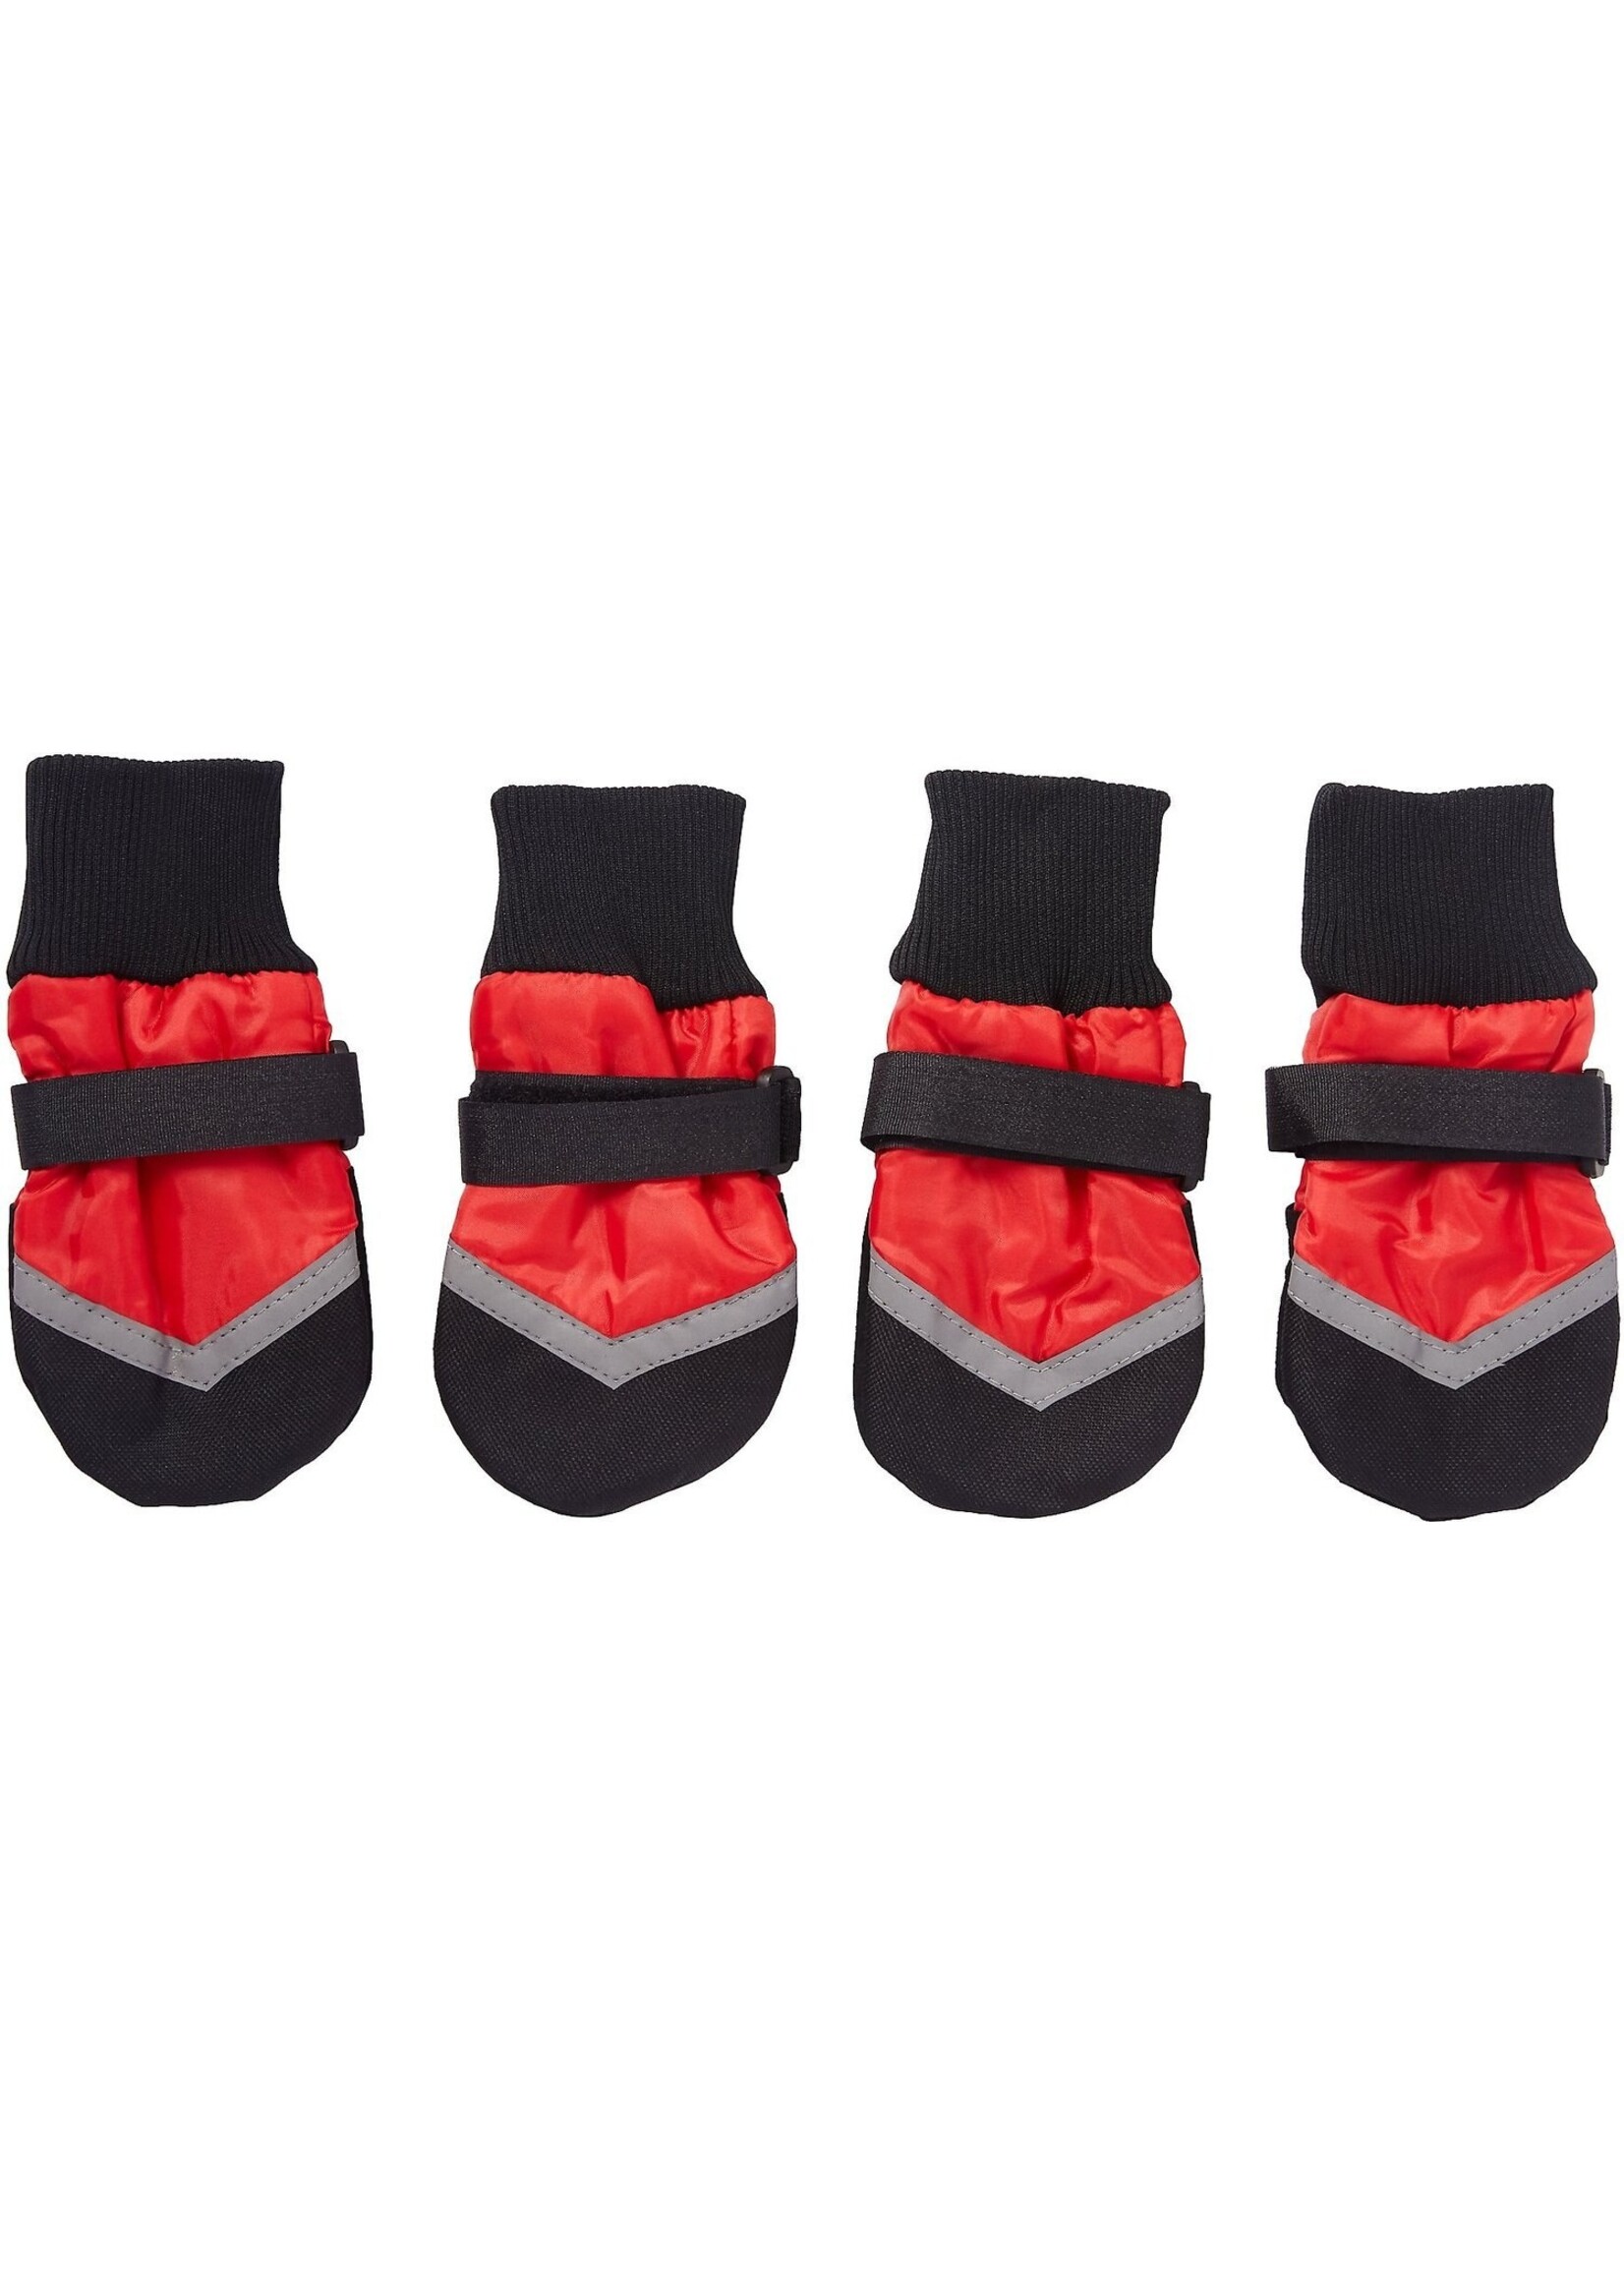 Ethical Ethical Extreme All Weather Boots Red 4pack